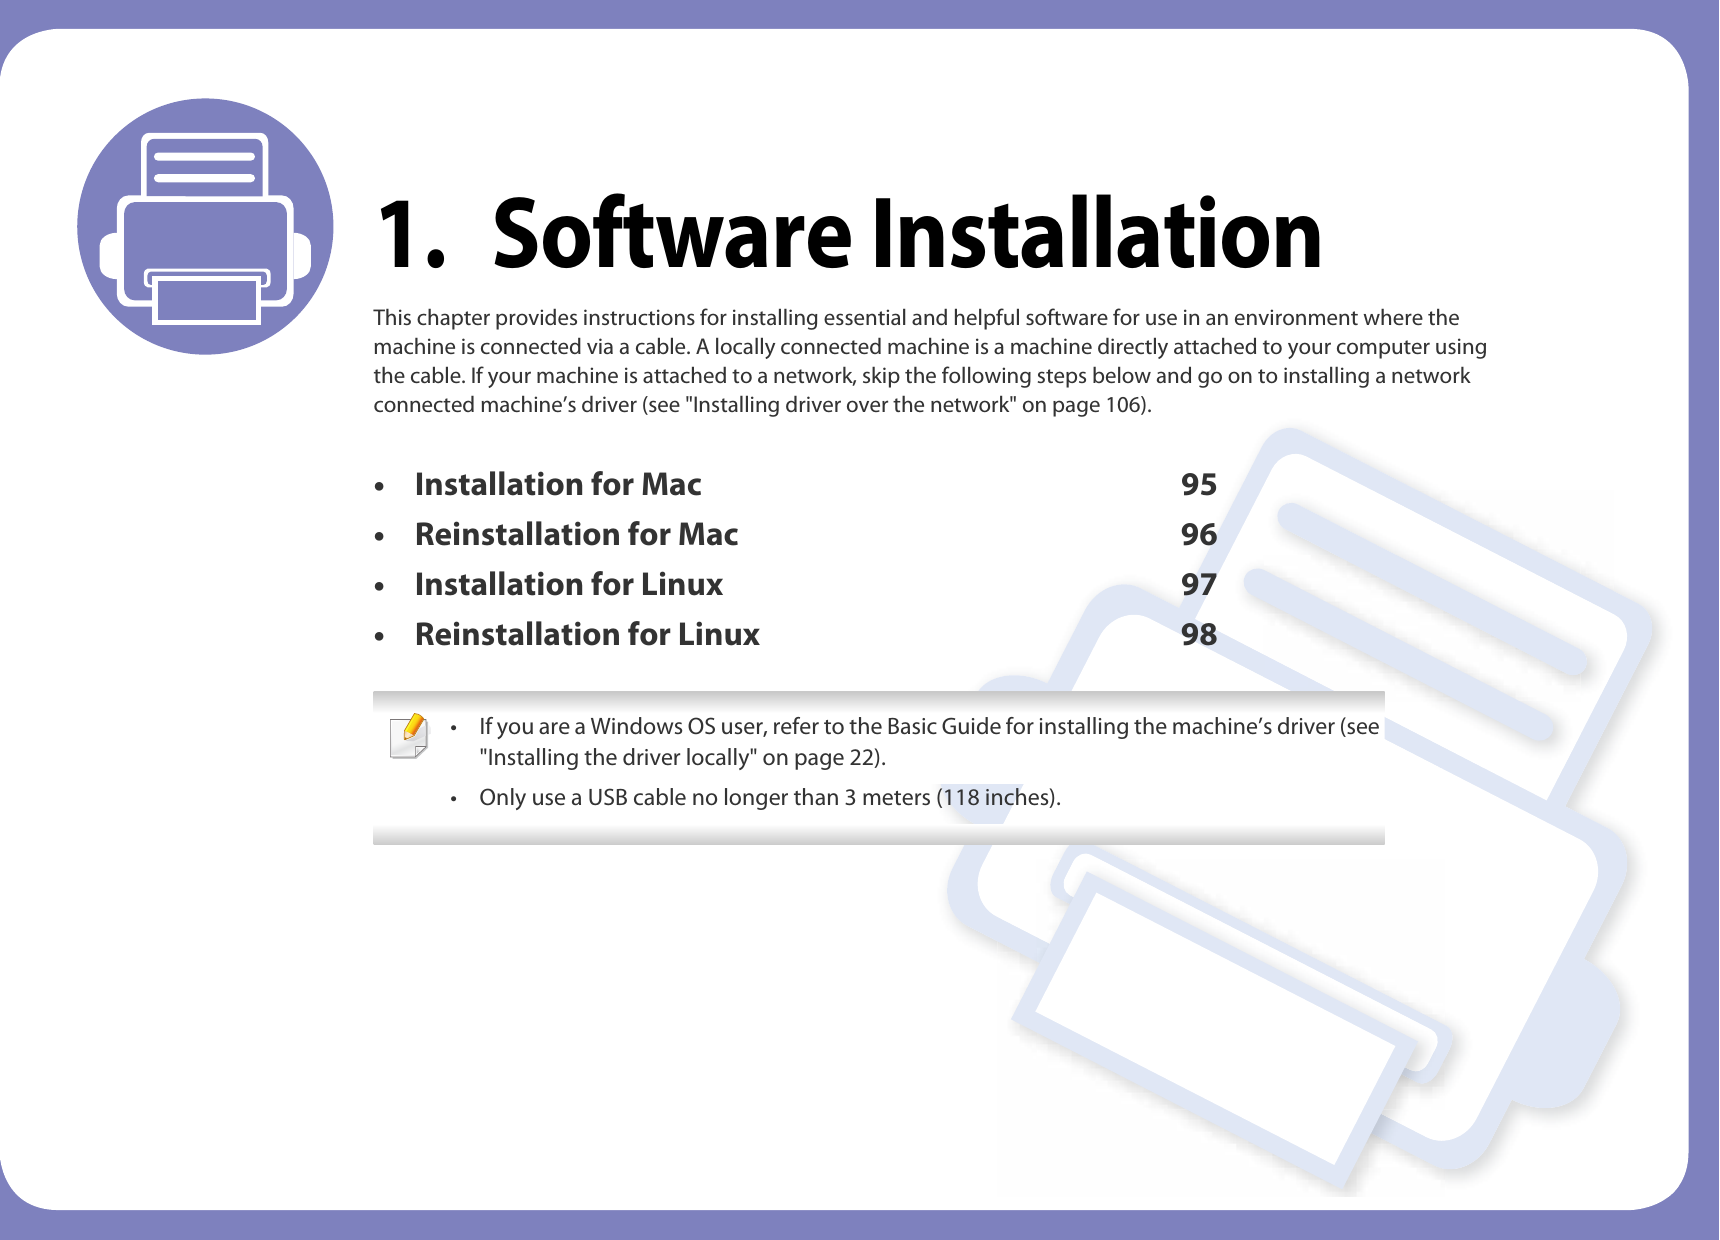 1. Software InstallationThis chapter provides instructions for installing essential and helpful software for use in an environment where the machine is connected via a cable. A locally connected machine is a machine directly attached to your computer using the cable. If your machine is attached to a network, skip the following steps below and go on to installing a network connected machine’s driver (see &quot;Installing driver over the network&quot; on page 106).• Installation for Mac 95• Reinstallation for Mac 96• Installation for Linux 97• Reinstallation for Linux 98 • If you are a Windows OS user, refer to the Basic Guide for installing the machine’s driver (see &quot;Installing the driver locally&quot; on page 22).• Only use a USB cable no longer than 3 meters (118 inches). 